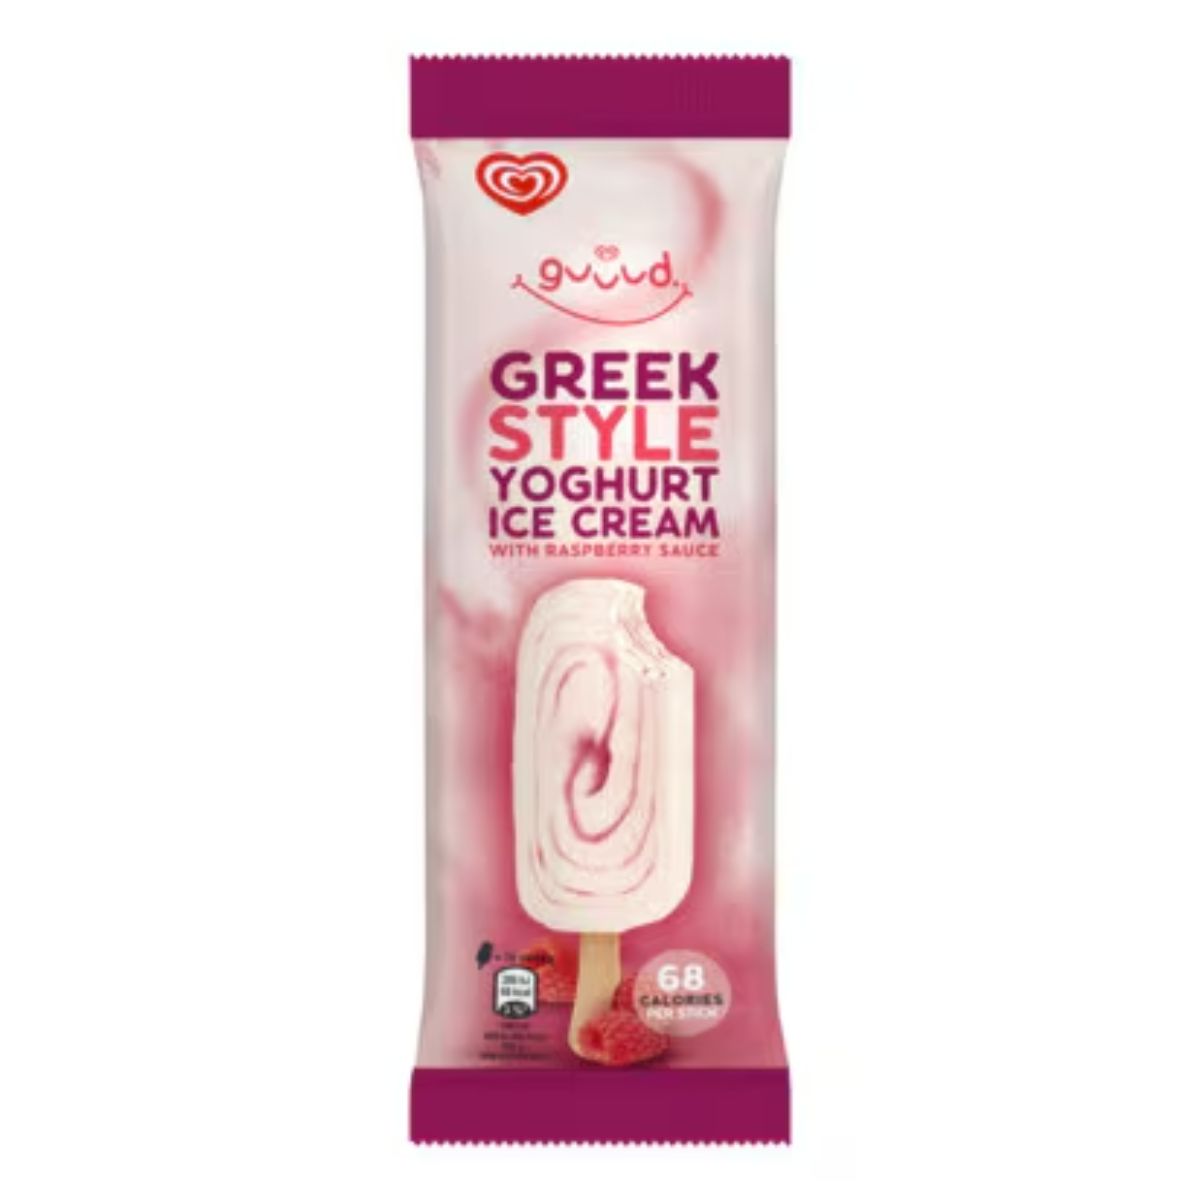 A pack of Walls - Guud Raspberry Ice Cream - 70ml, featuring an image of the product on a pink background.